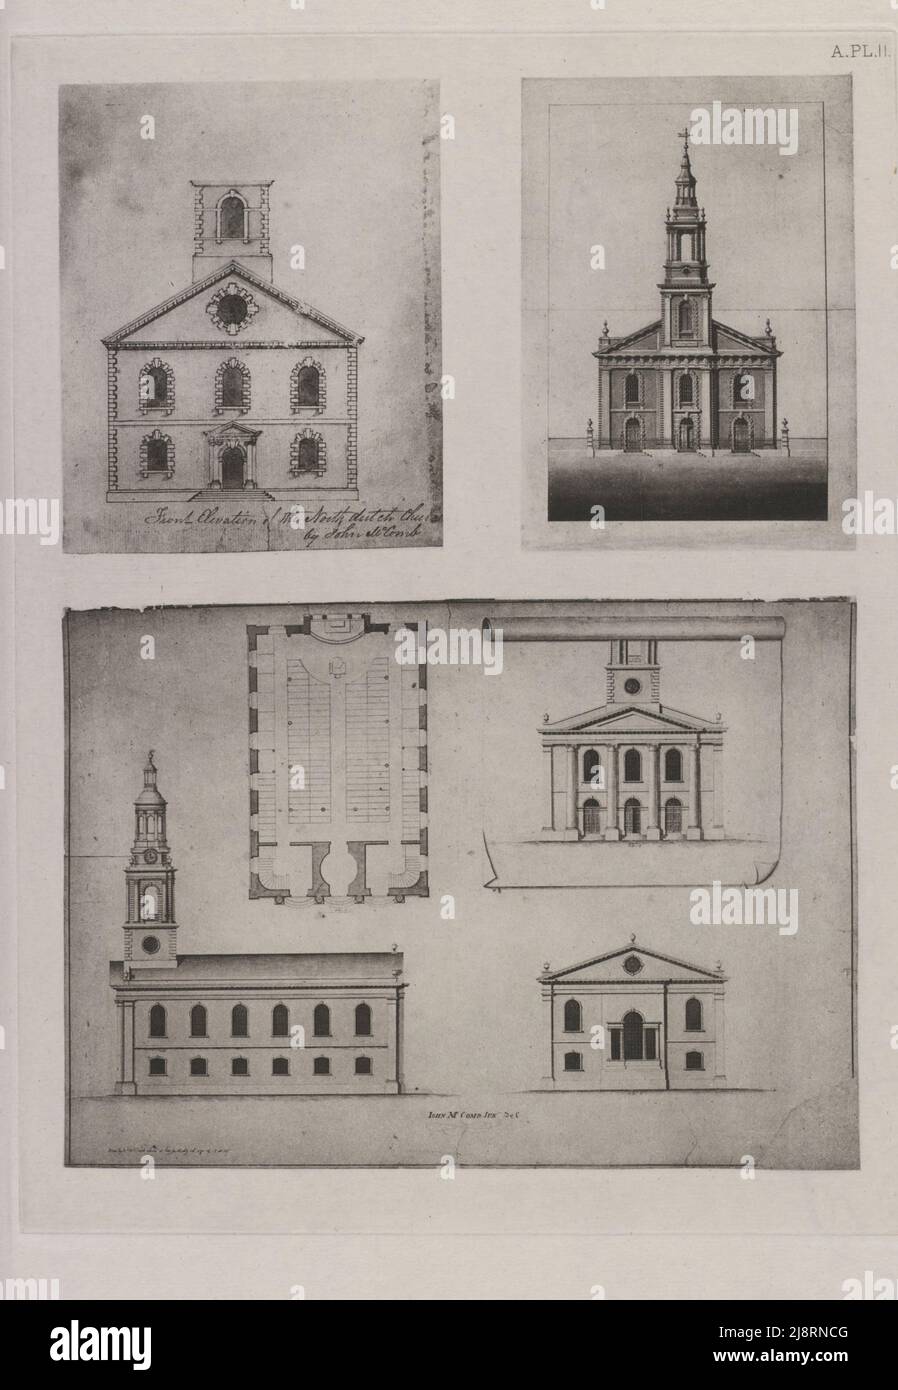 Front Elevation of the North Dutch Church c. 1769; Elevation of Murray Street Church 1811; Plan and Three Elevations of St. John’s Chapel c. 1803 The iconography of Manhattan Island, 1498-1909 compiled from original sources and illustrated by photo-intaglio reproductions of important maps, plans, views, and documents in public and private collections - Volume 3 by Isaac Newton Phelps Stokes, Publisher New York : Robert H. Dodd 1918 Stock Photo